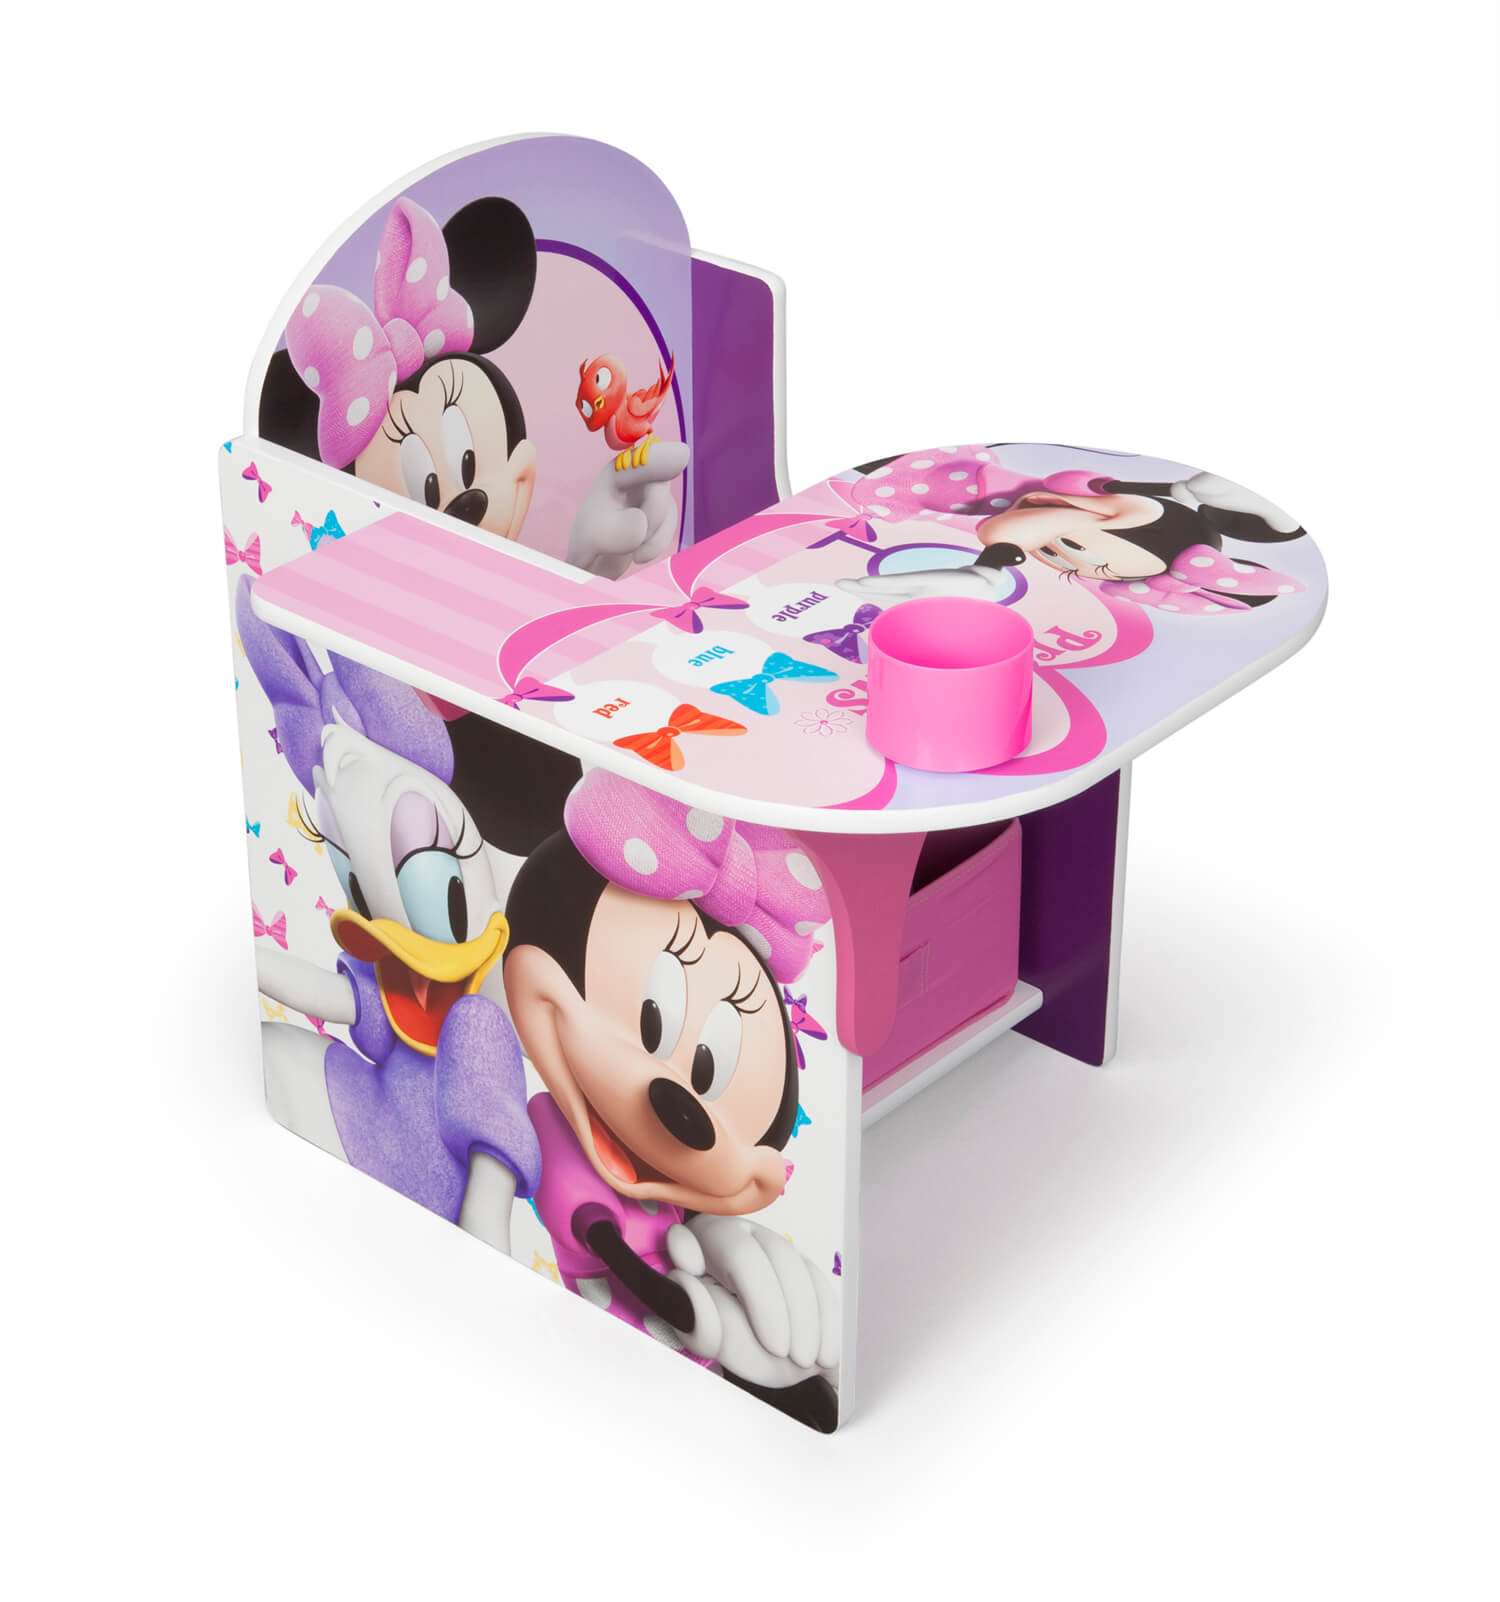 Minnie Mouse Upholstered Chair - Delta Children